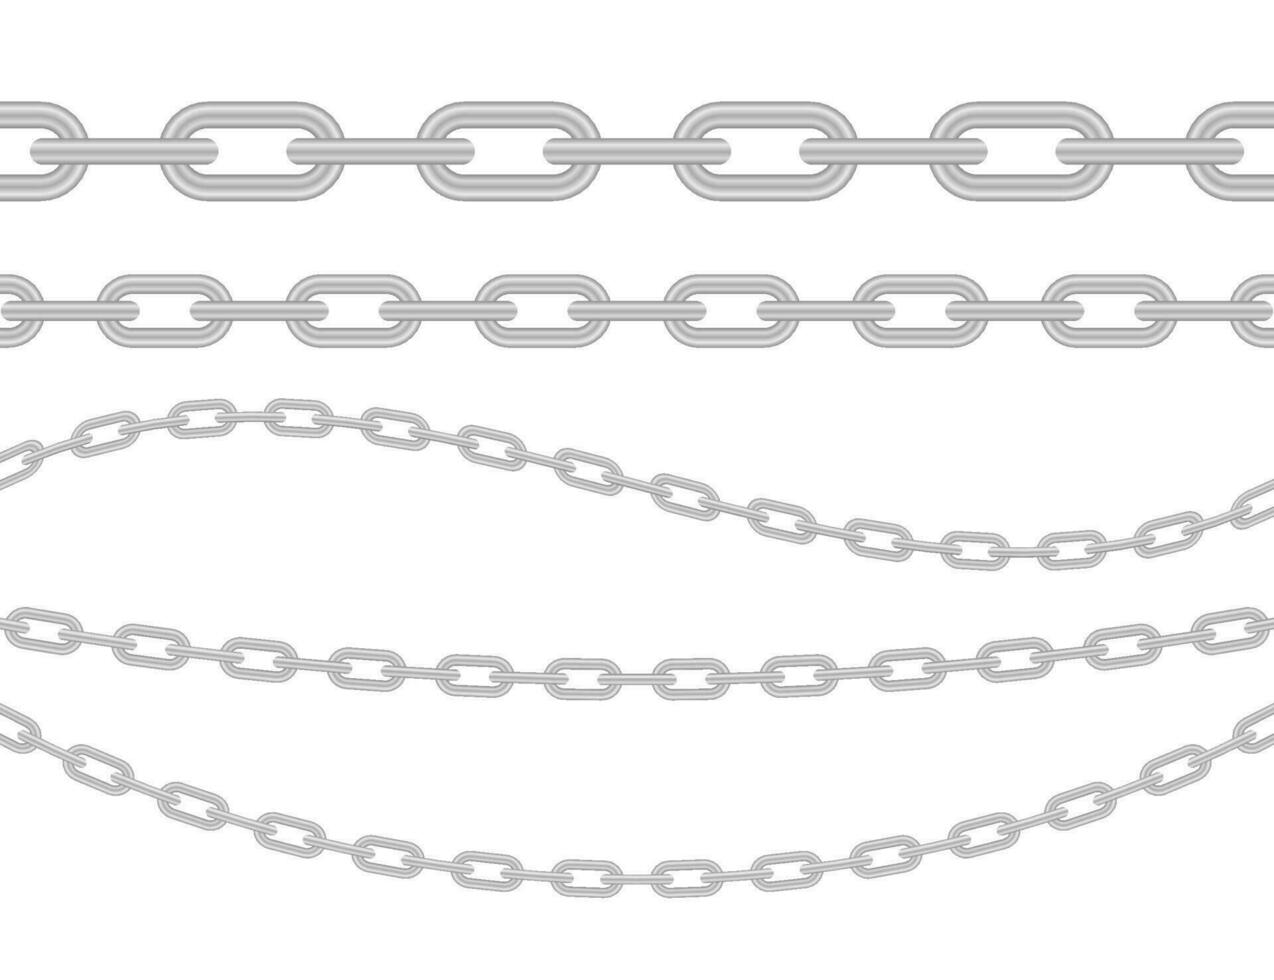 Metallic Chain. Block chain. Collection of seamless metal chains colored silver. Vector stock illustration